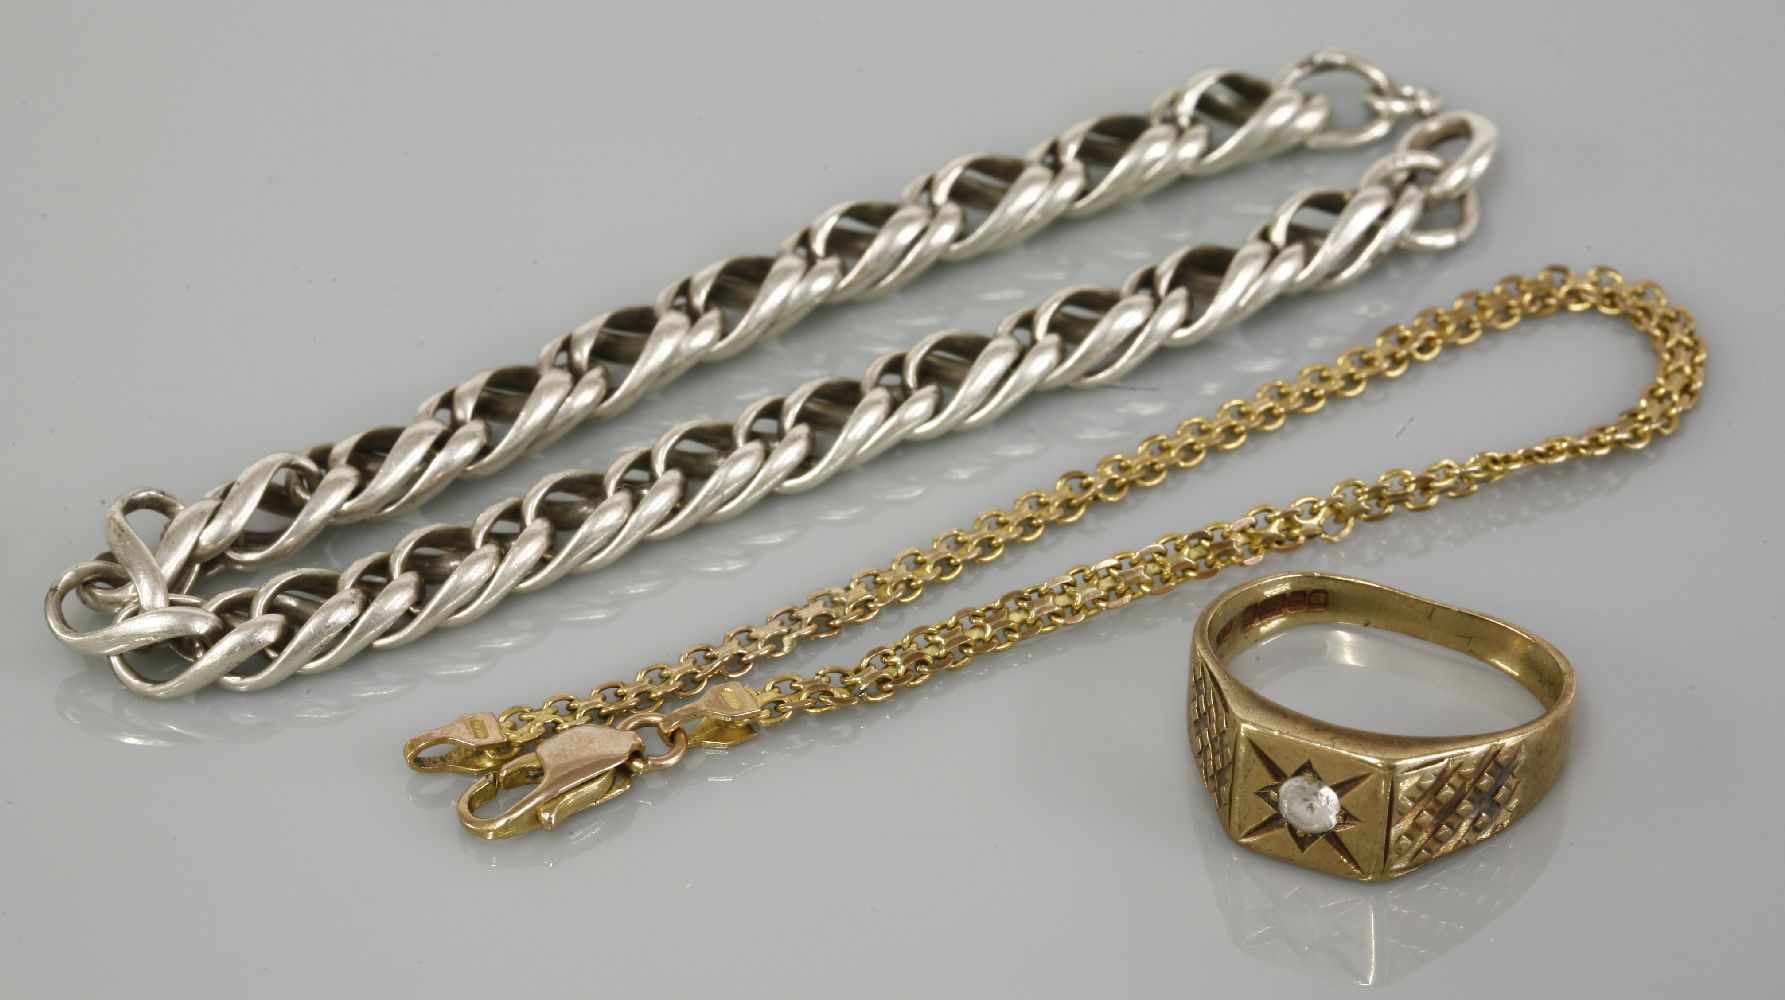 A gentleman's 9ct gold synthetic spinel ring, a 9ct gold Bismark bracelet, and a silver bracelet